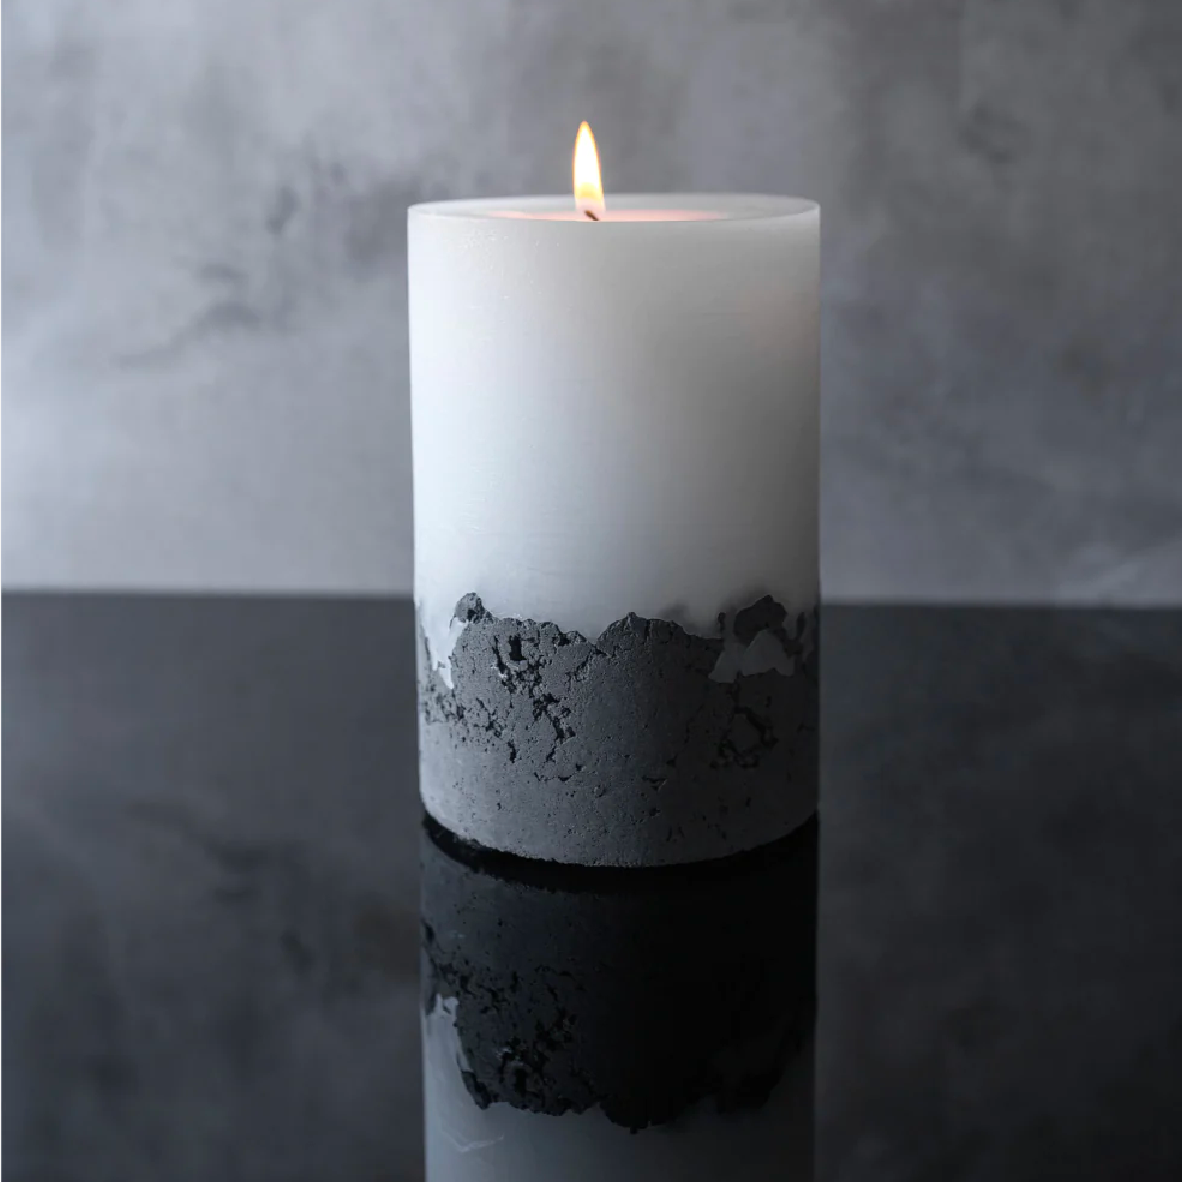 The Tall Concrete Candle